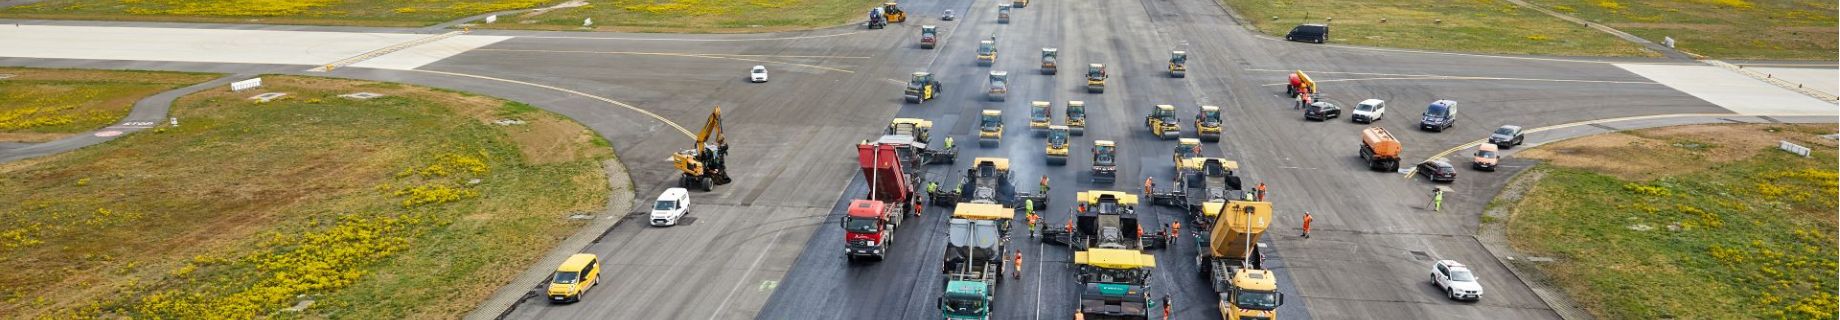 Header image of the traffic route construction